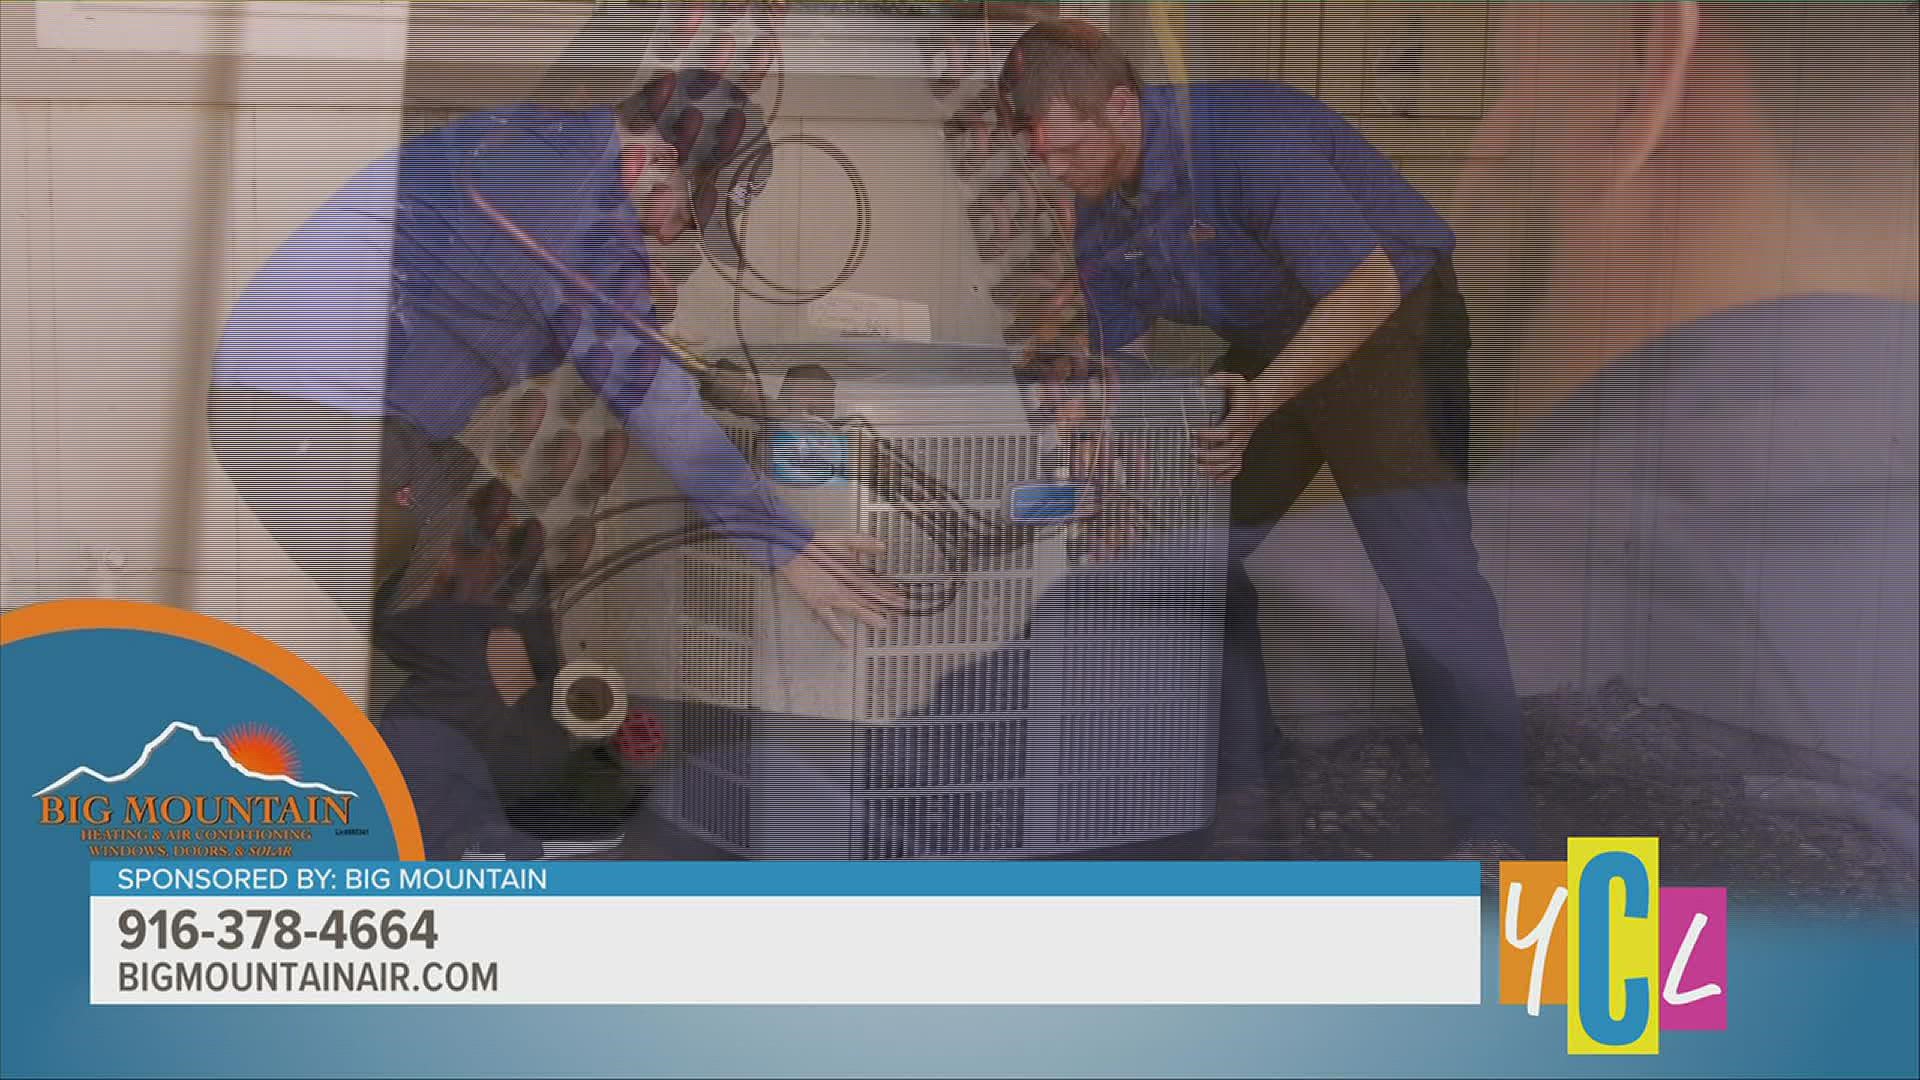 Turkey Day is just around the corner and before inviting loved ones over, make sure your HVAC unit is up and running! This segment is paid by Big Mountain.